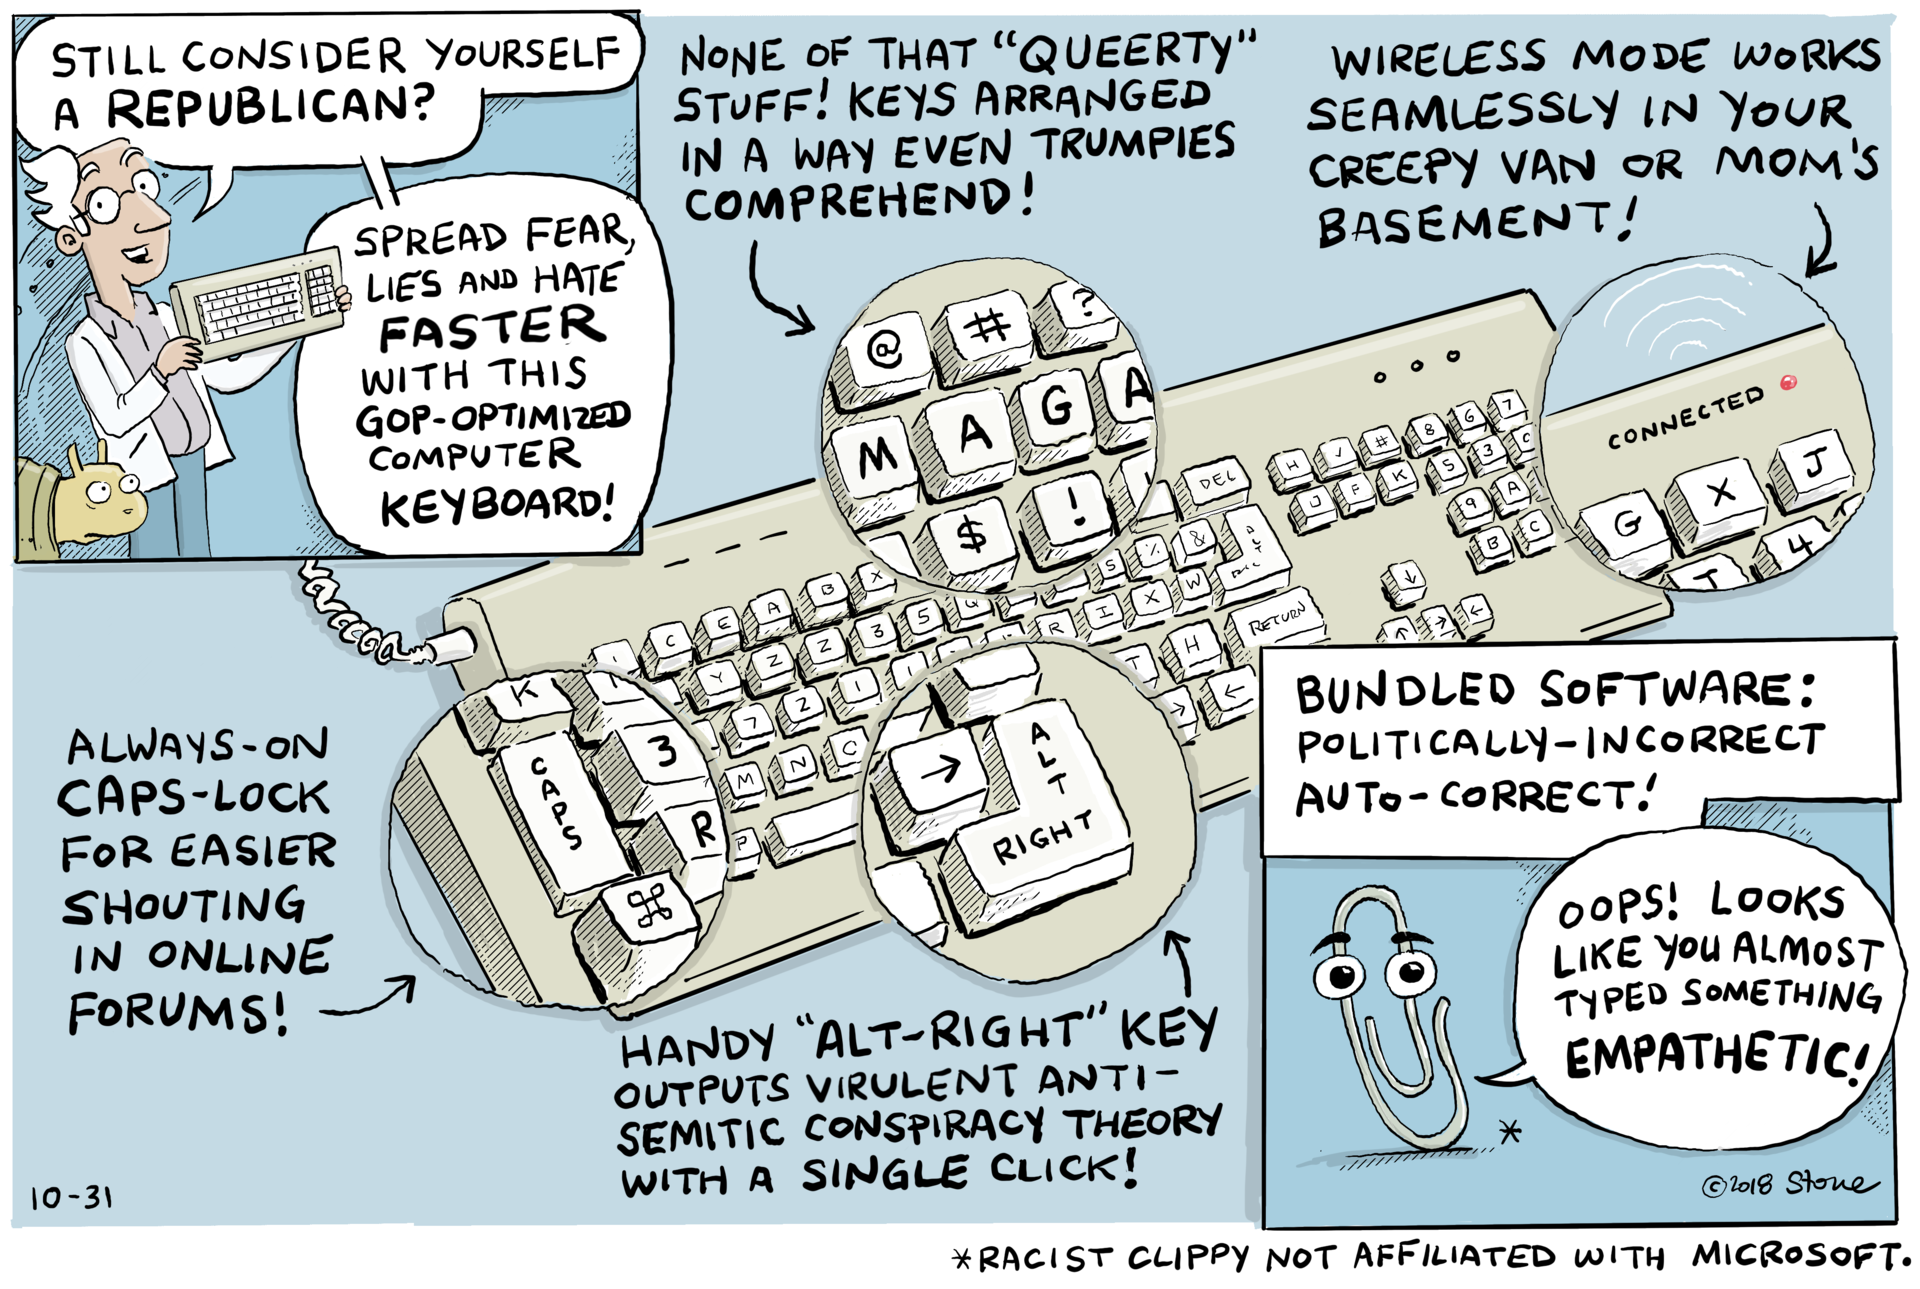 Zeno invents a USB keyboard designed for right-wing crazies.